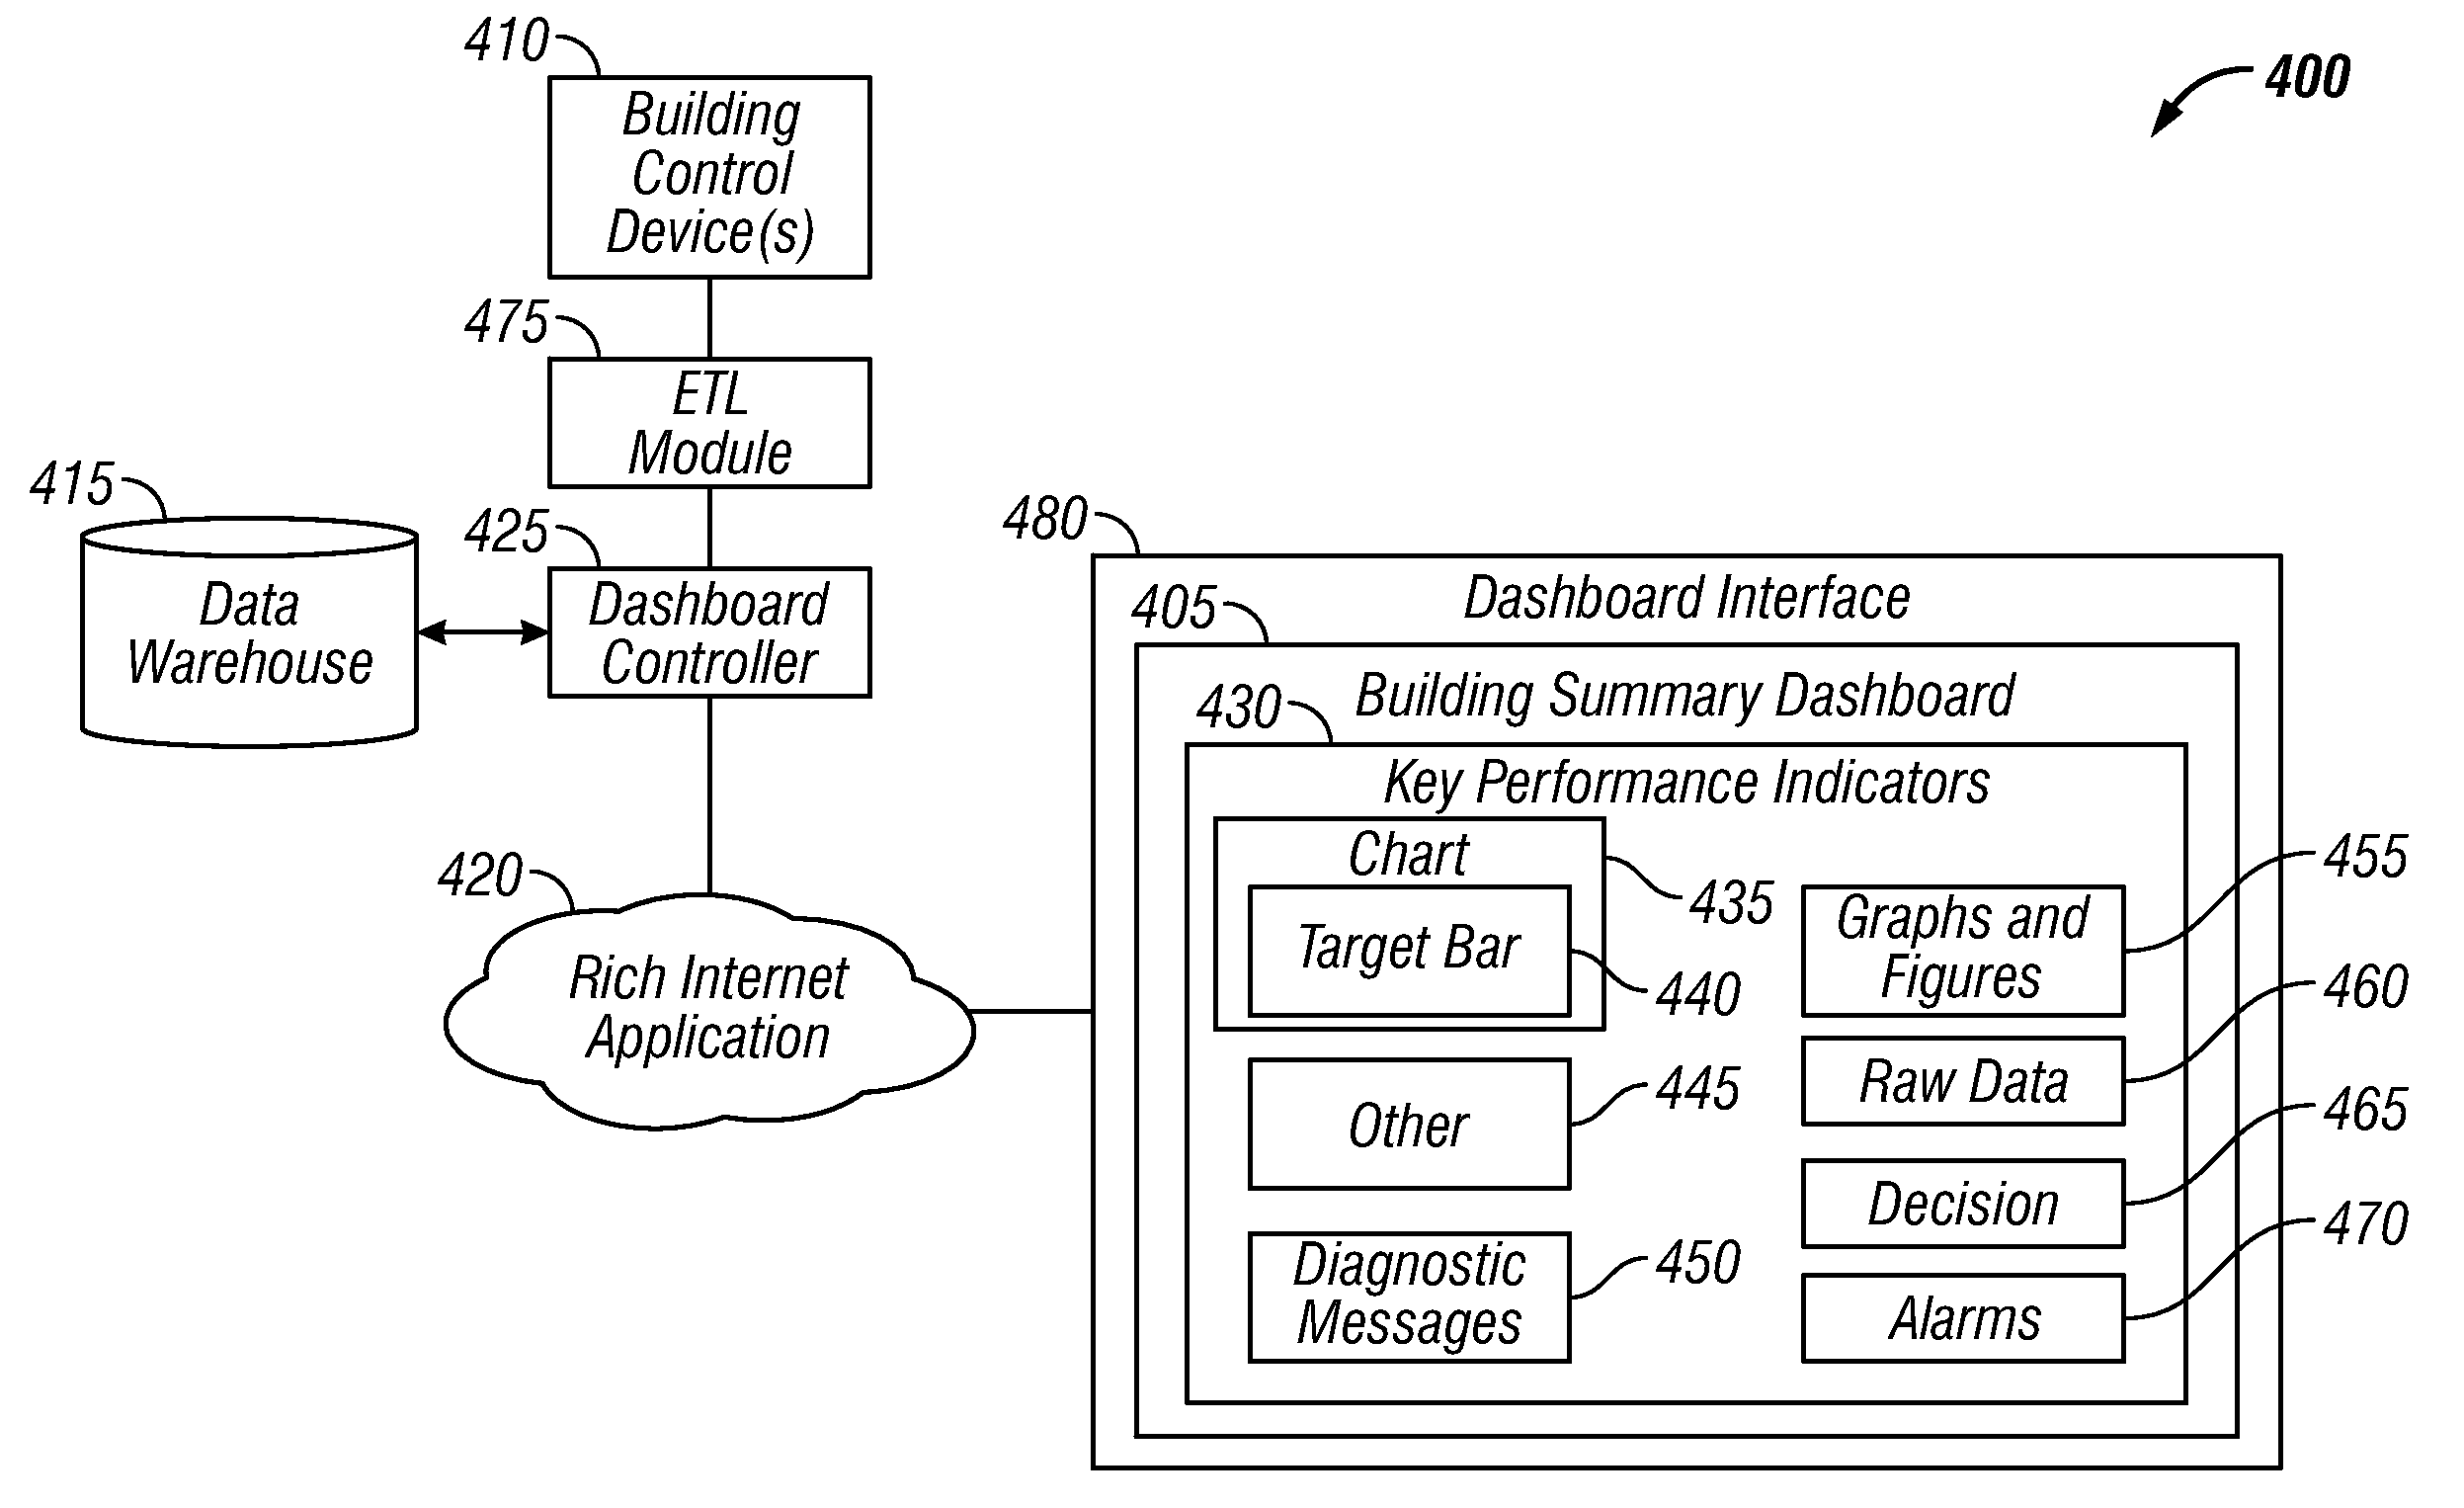 Method and System for Providing an Integrated Building Summary Dashboard